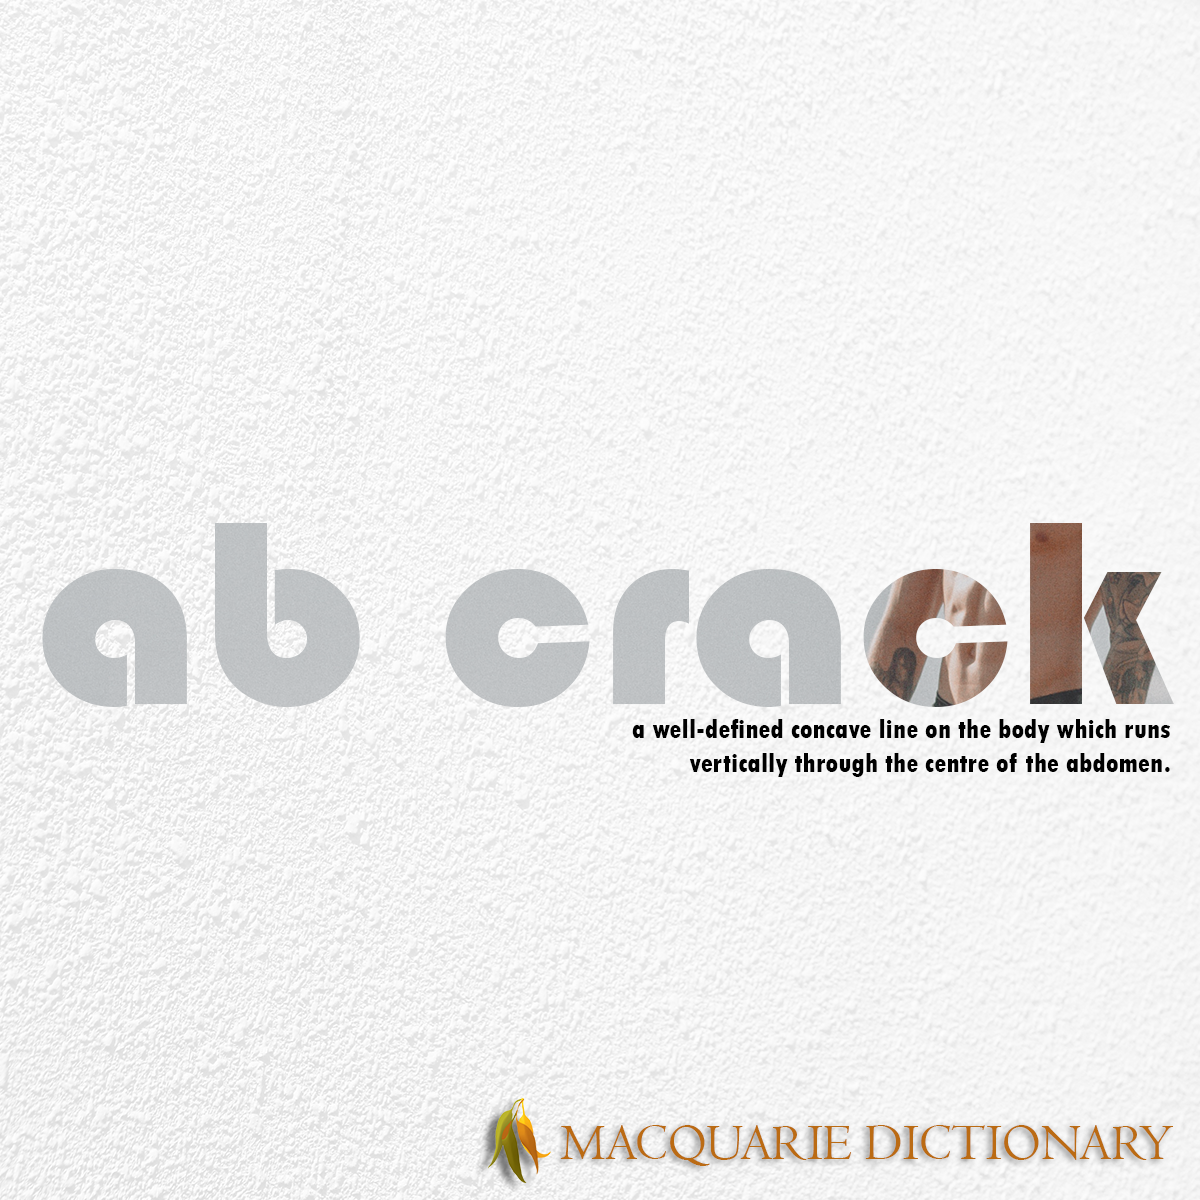 Image of Macquarie Dictionary Word of the Year - ab crack - a well-defined concave line on the body which runs vertically through the centre of the abdomen.